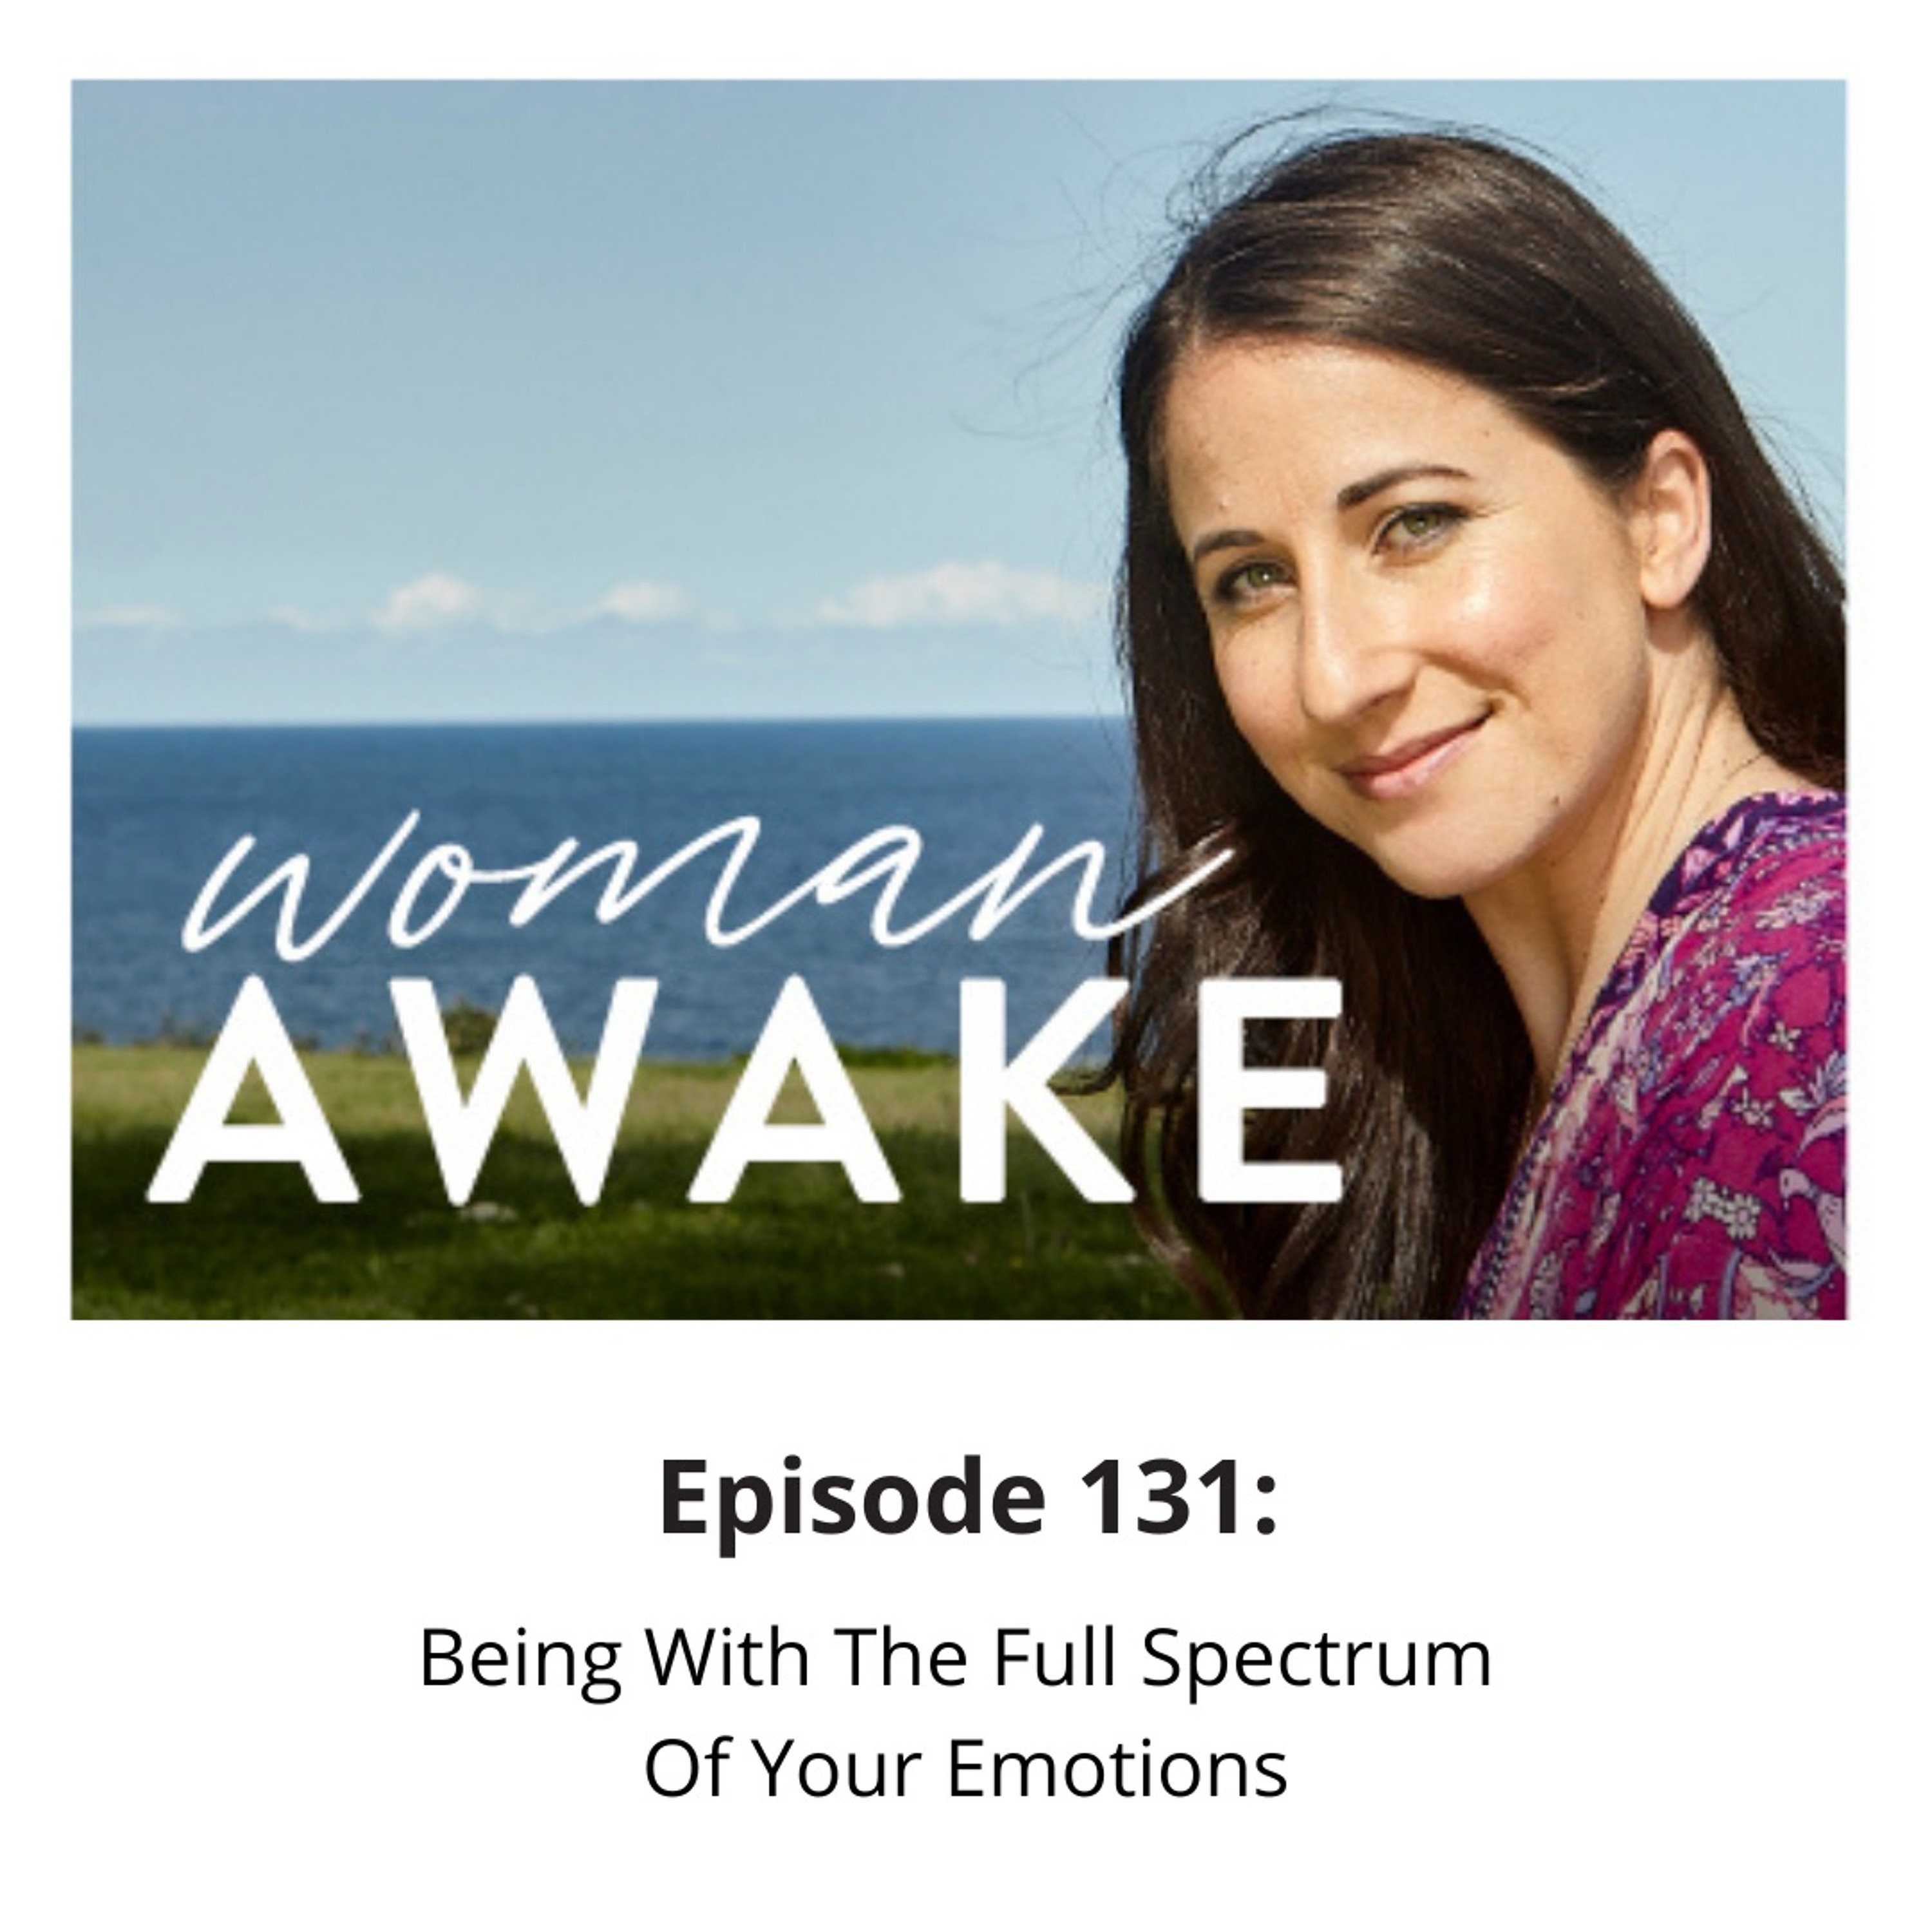 Woman Awake Episode 131: Being with the full spectrum of your emotions